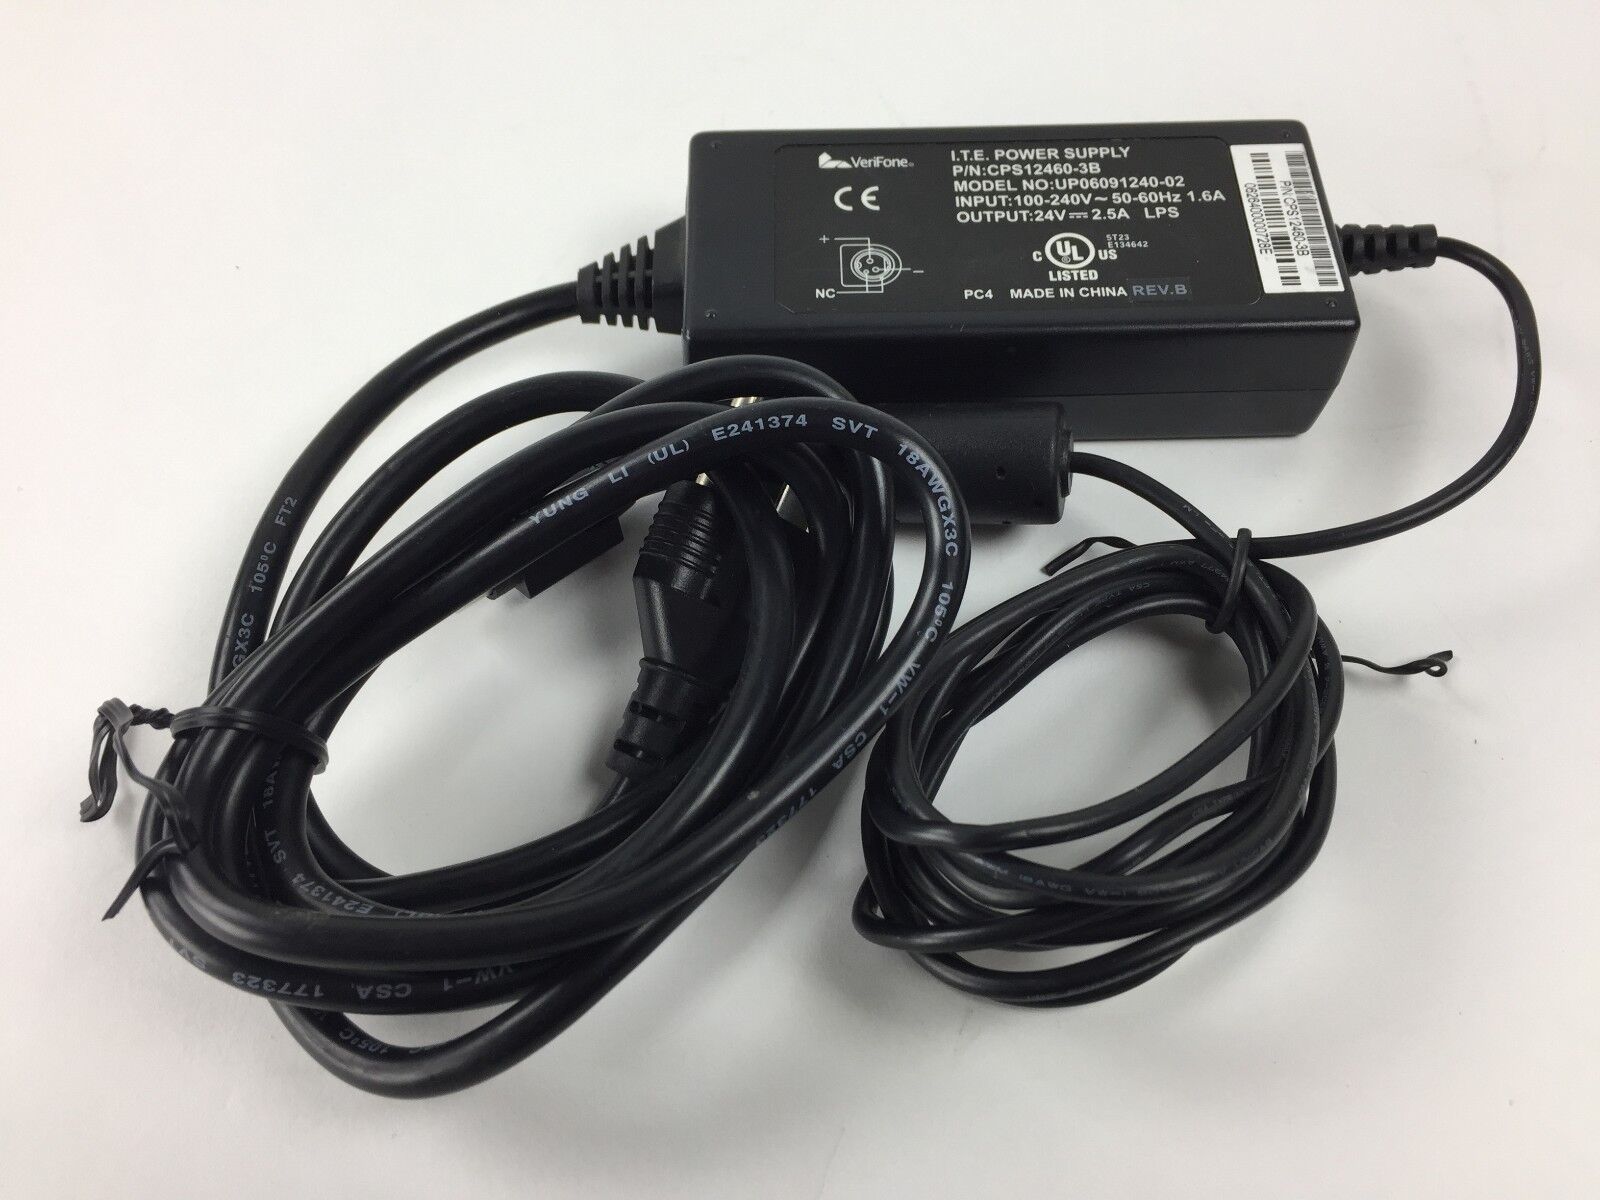 Verifone OMNI Series 3740 ITE CPS12460-3B UP06091240-02 24V Power Supply